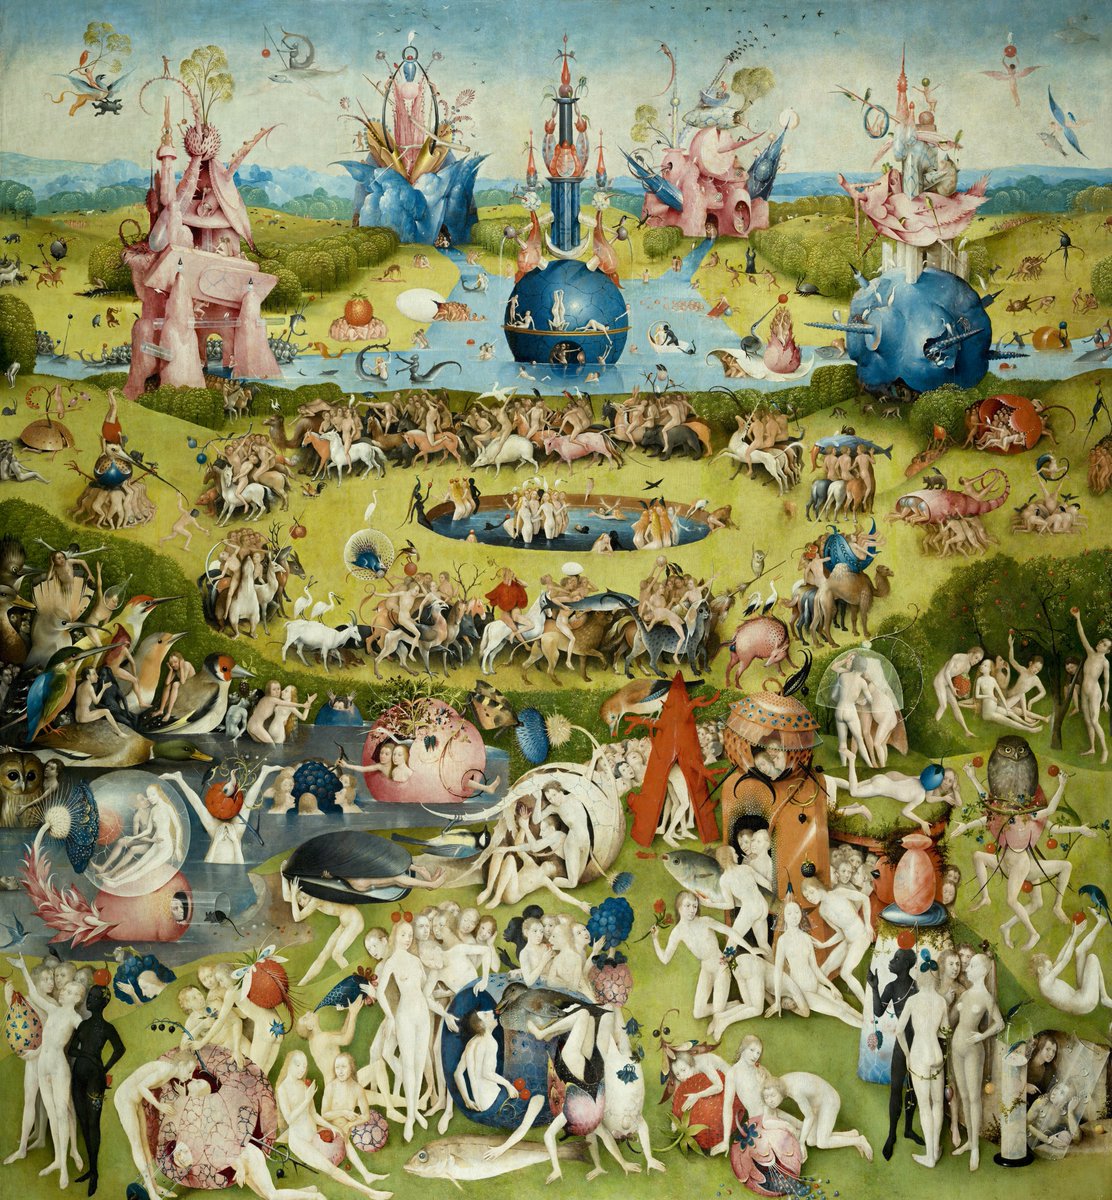 My favourite paintings from each major movement of art - a thread 🧵

1. Northern Renaissance: 'The Garden of Earthly Delights', Hieronymus Bosch (c.1490-1510)